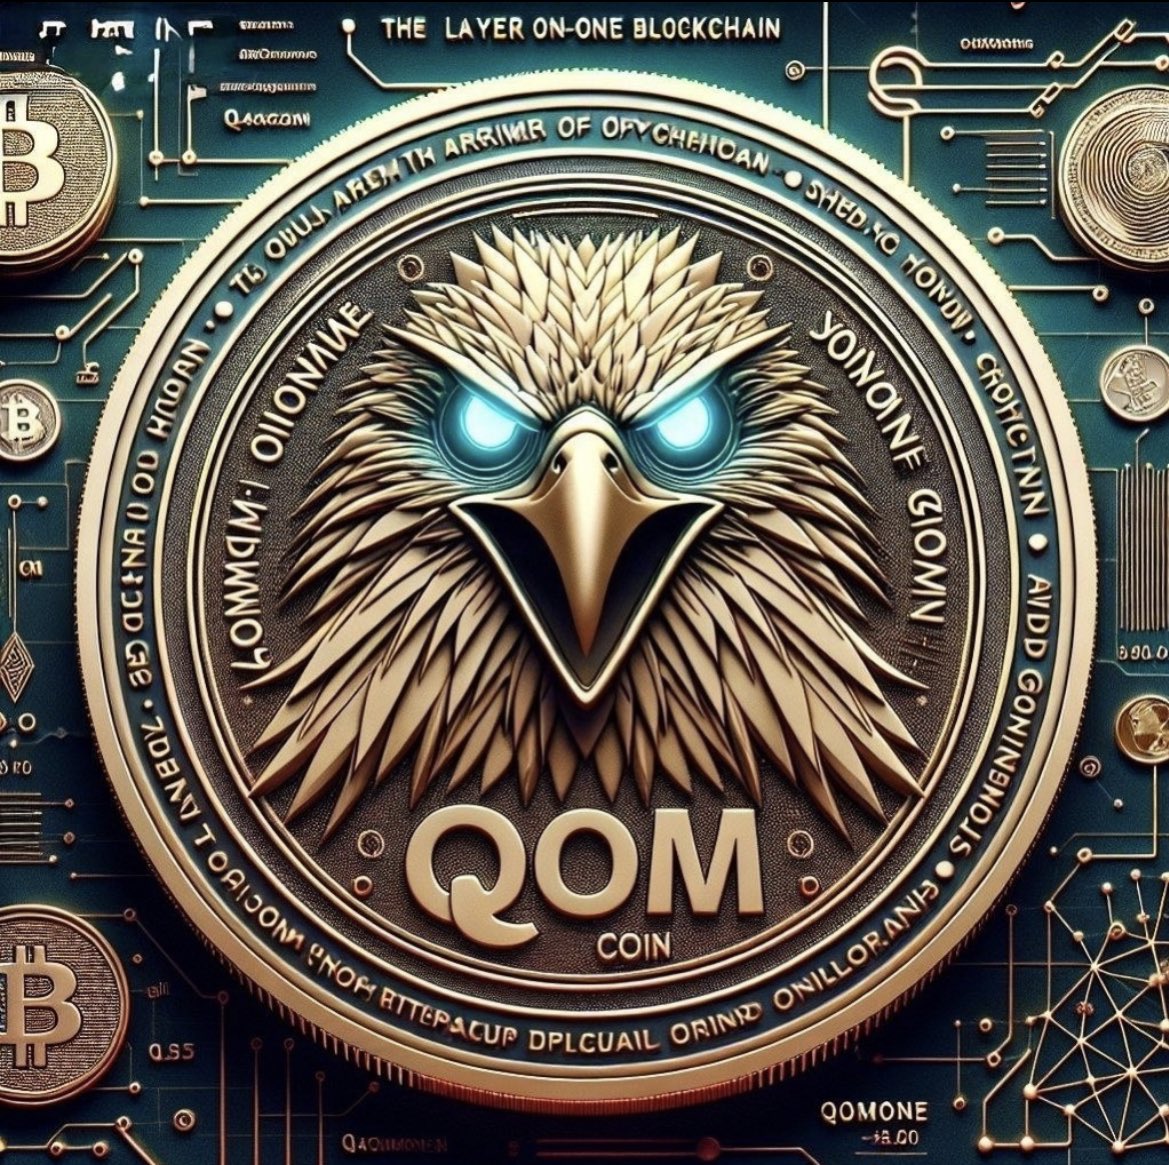 5🧵

To wrap it all up 

with QOM $qom we will give power to the unbanked to use the financial system of the future without paying unobtainable gas fees 

And lay the base bricks to many dApps that require low fees for them to integrate into our daily life seamlessly